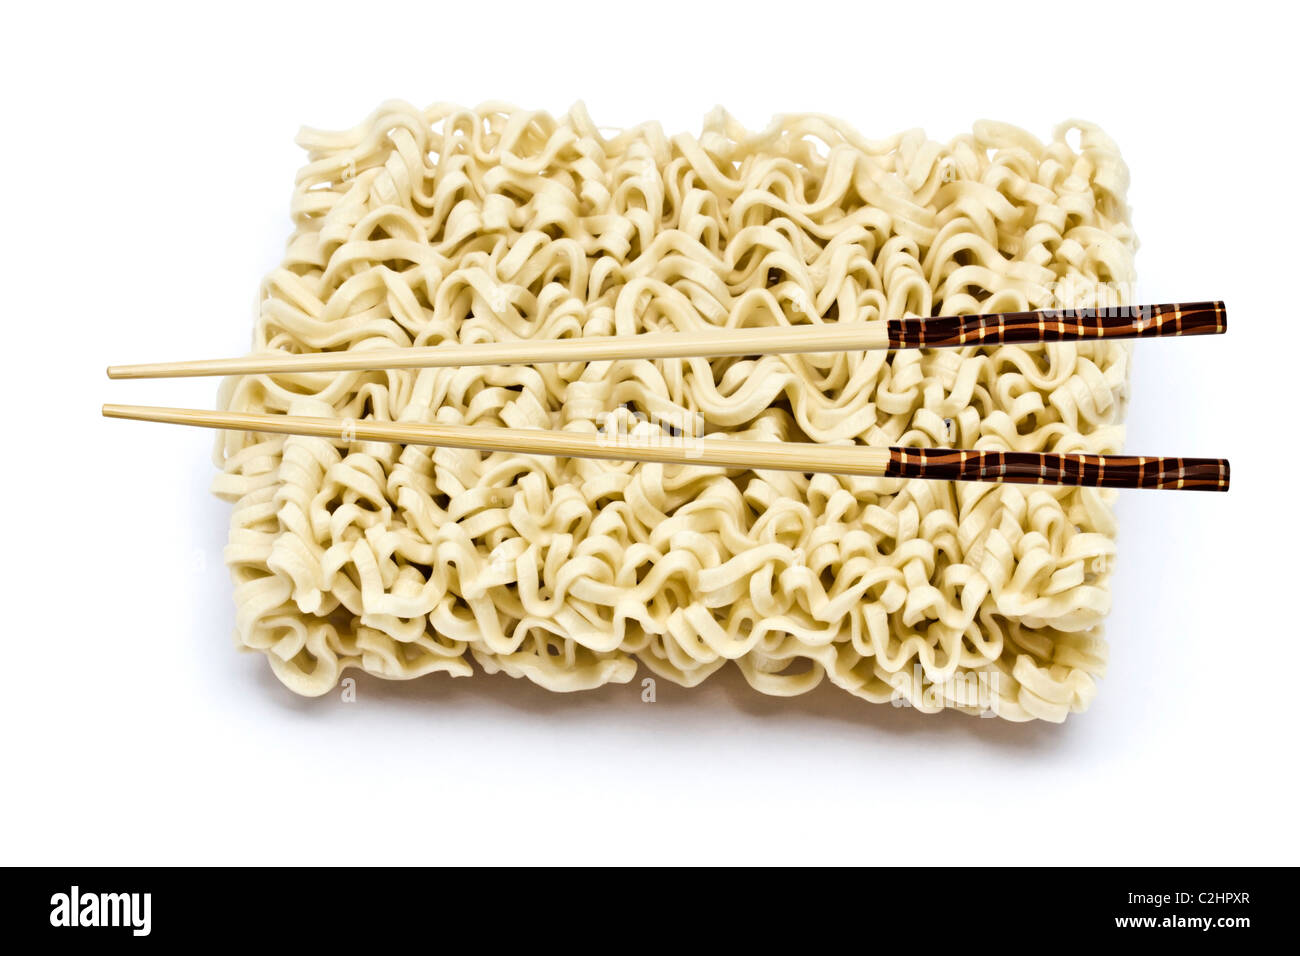 A block of instant noodles and chopsticks closeup on white Stock Photo